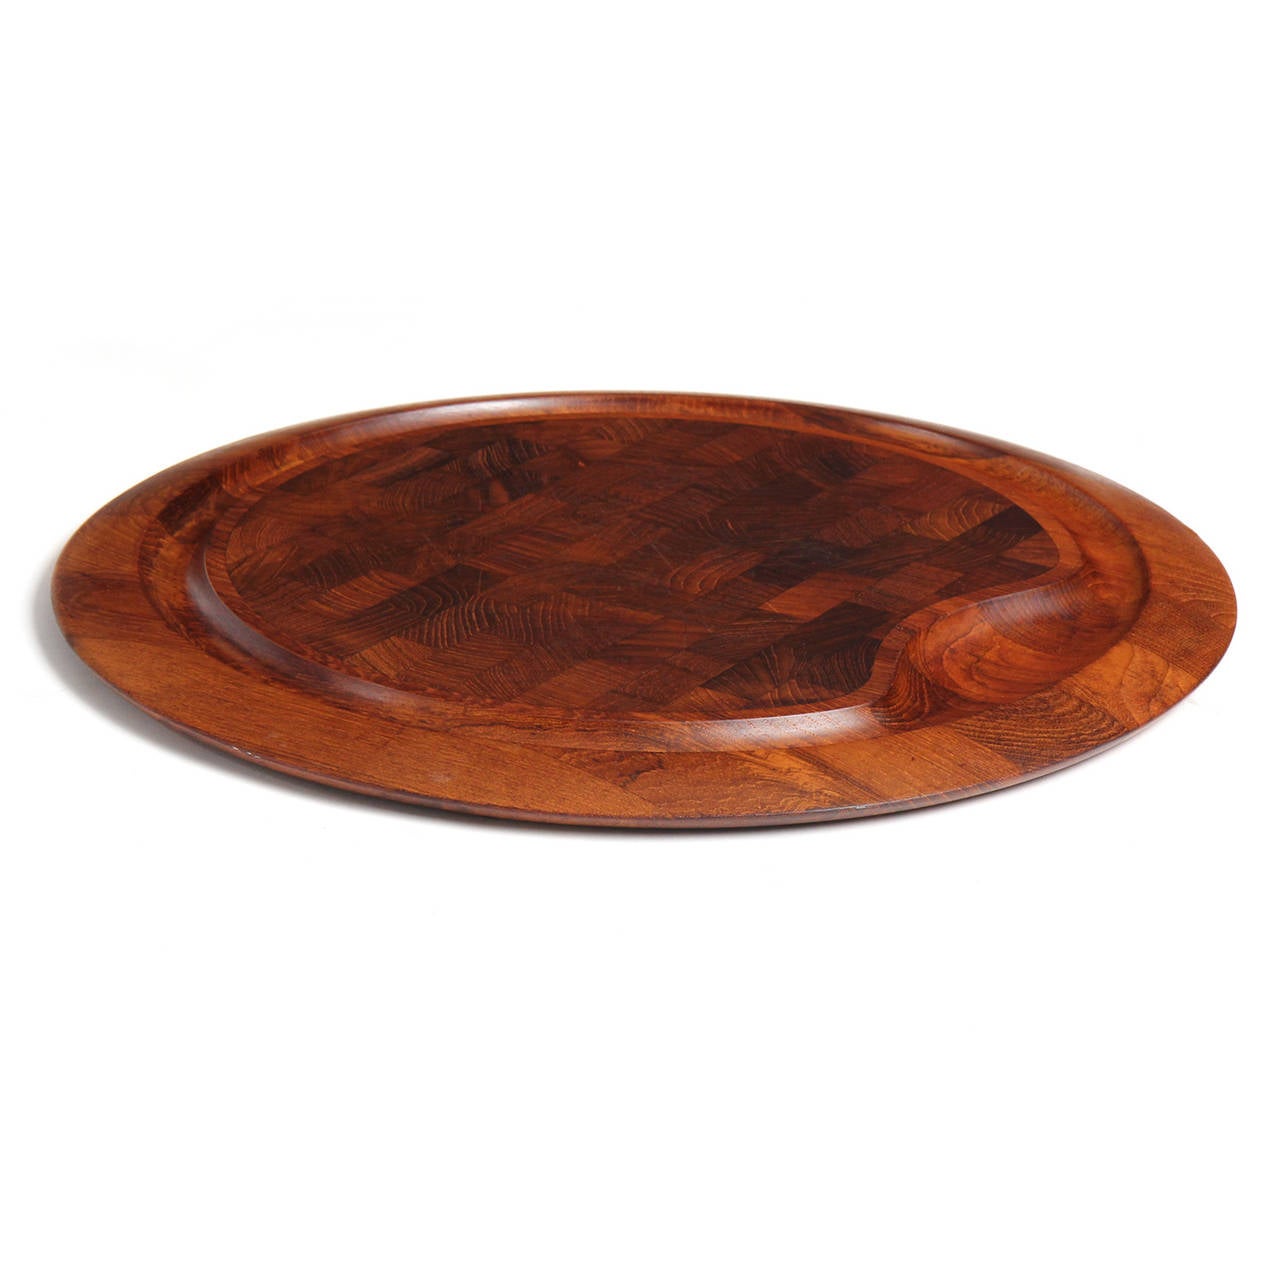 An uncommon, well-scaled and finely crafted circular mutenye serving board having an end grain cutting surface and a sculptural recessed well.